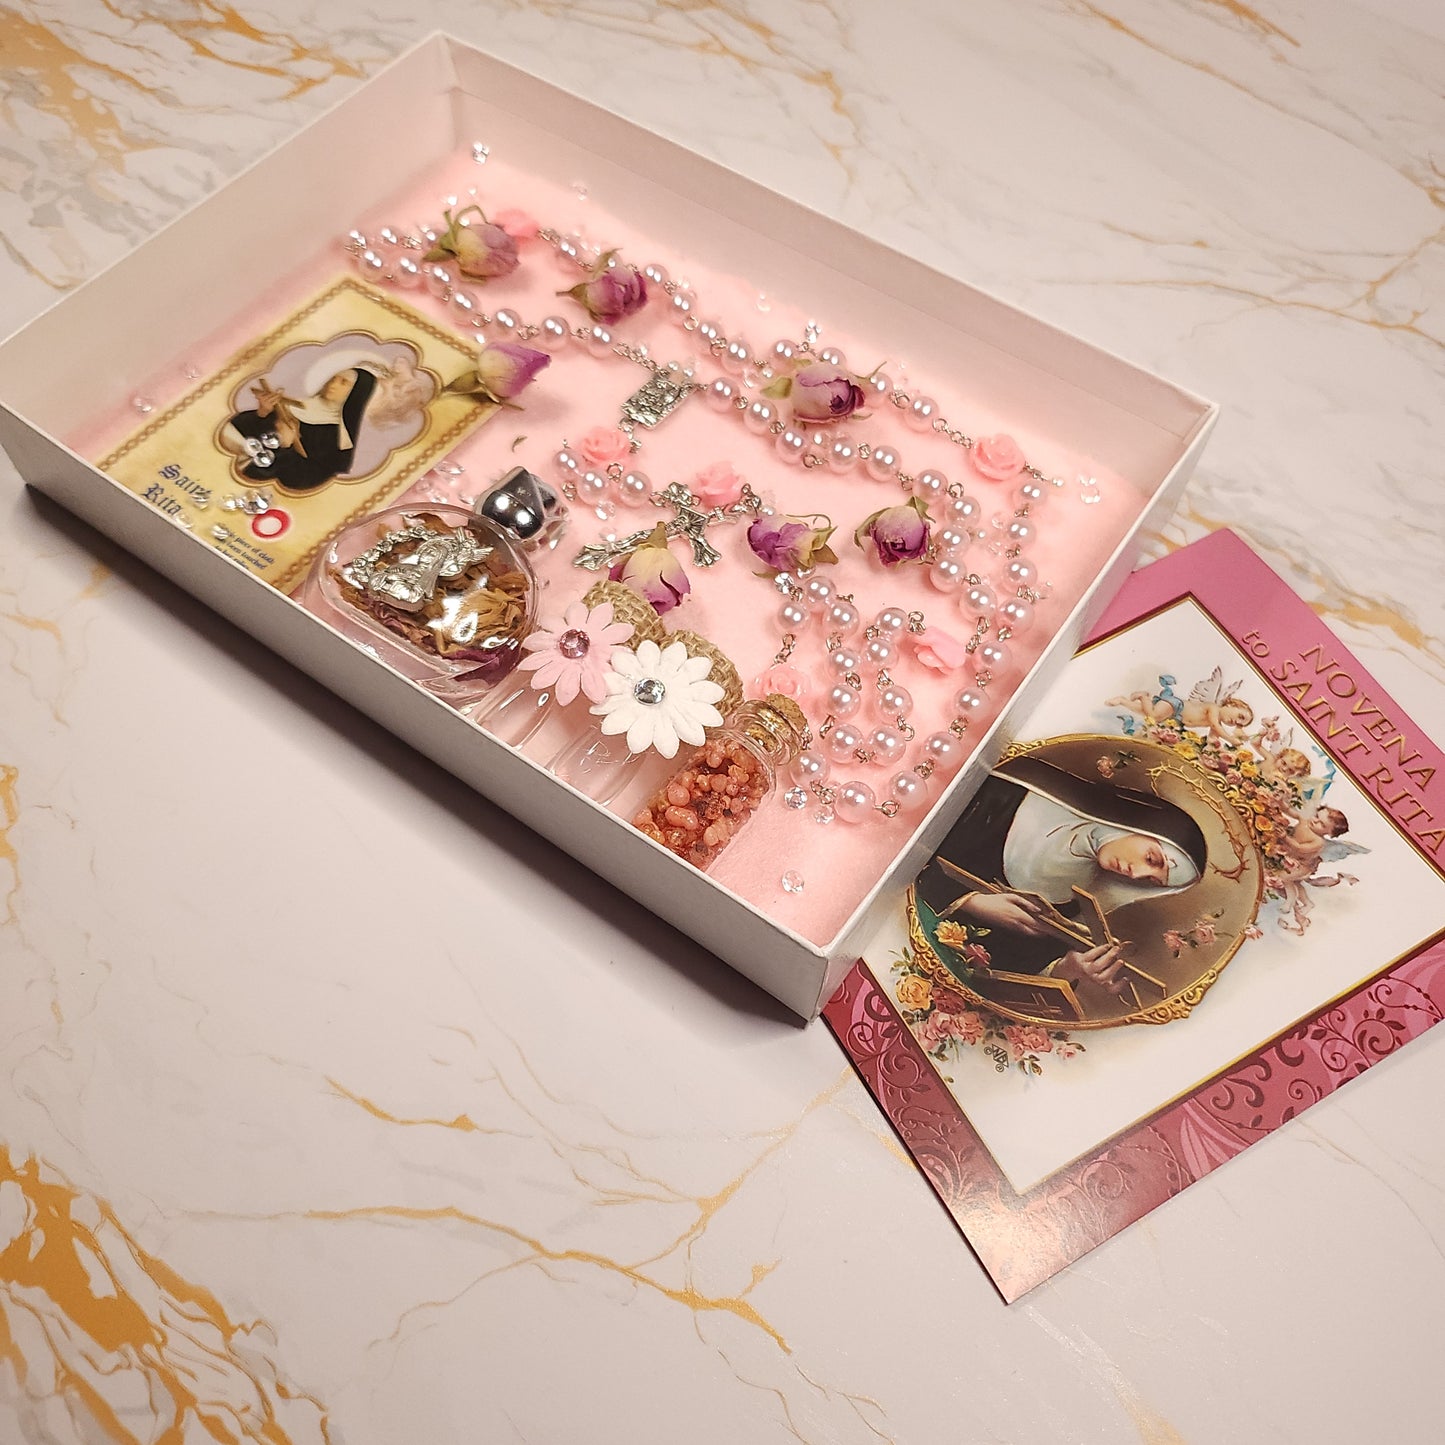 Saint Rita of Cascia Box - Our Lady of Gifts